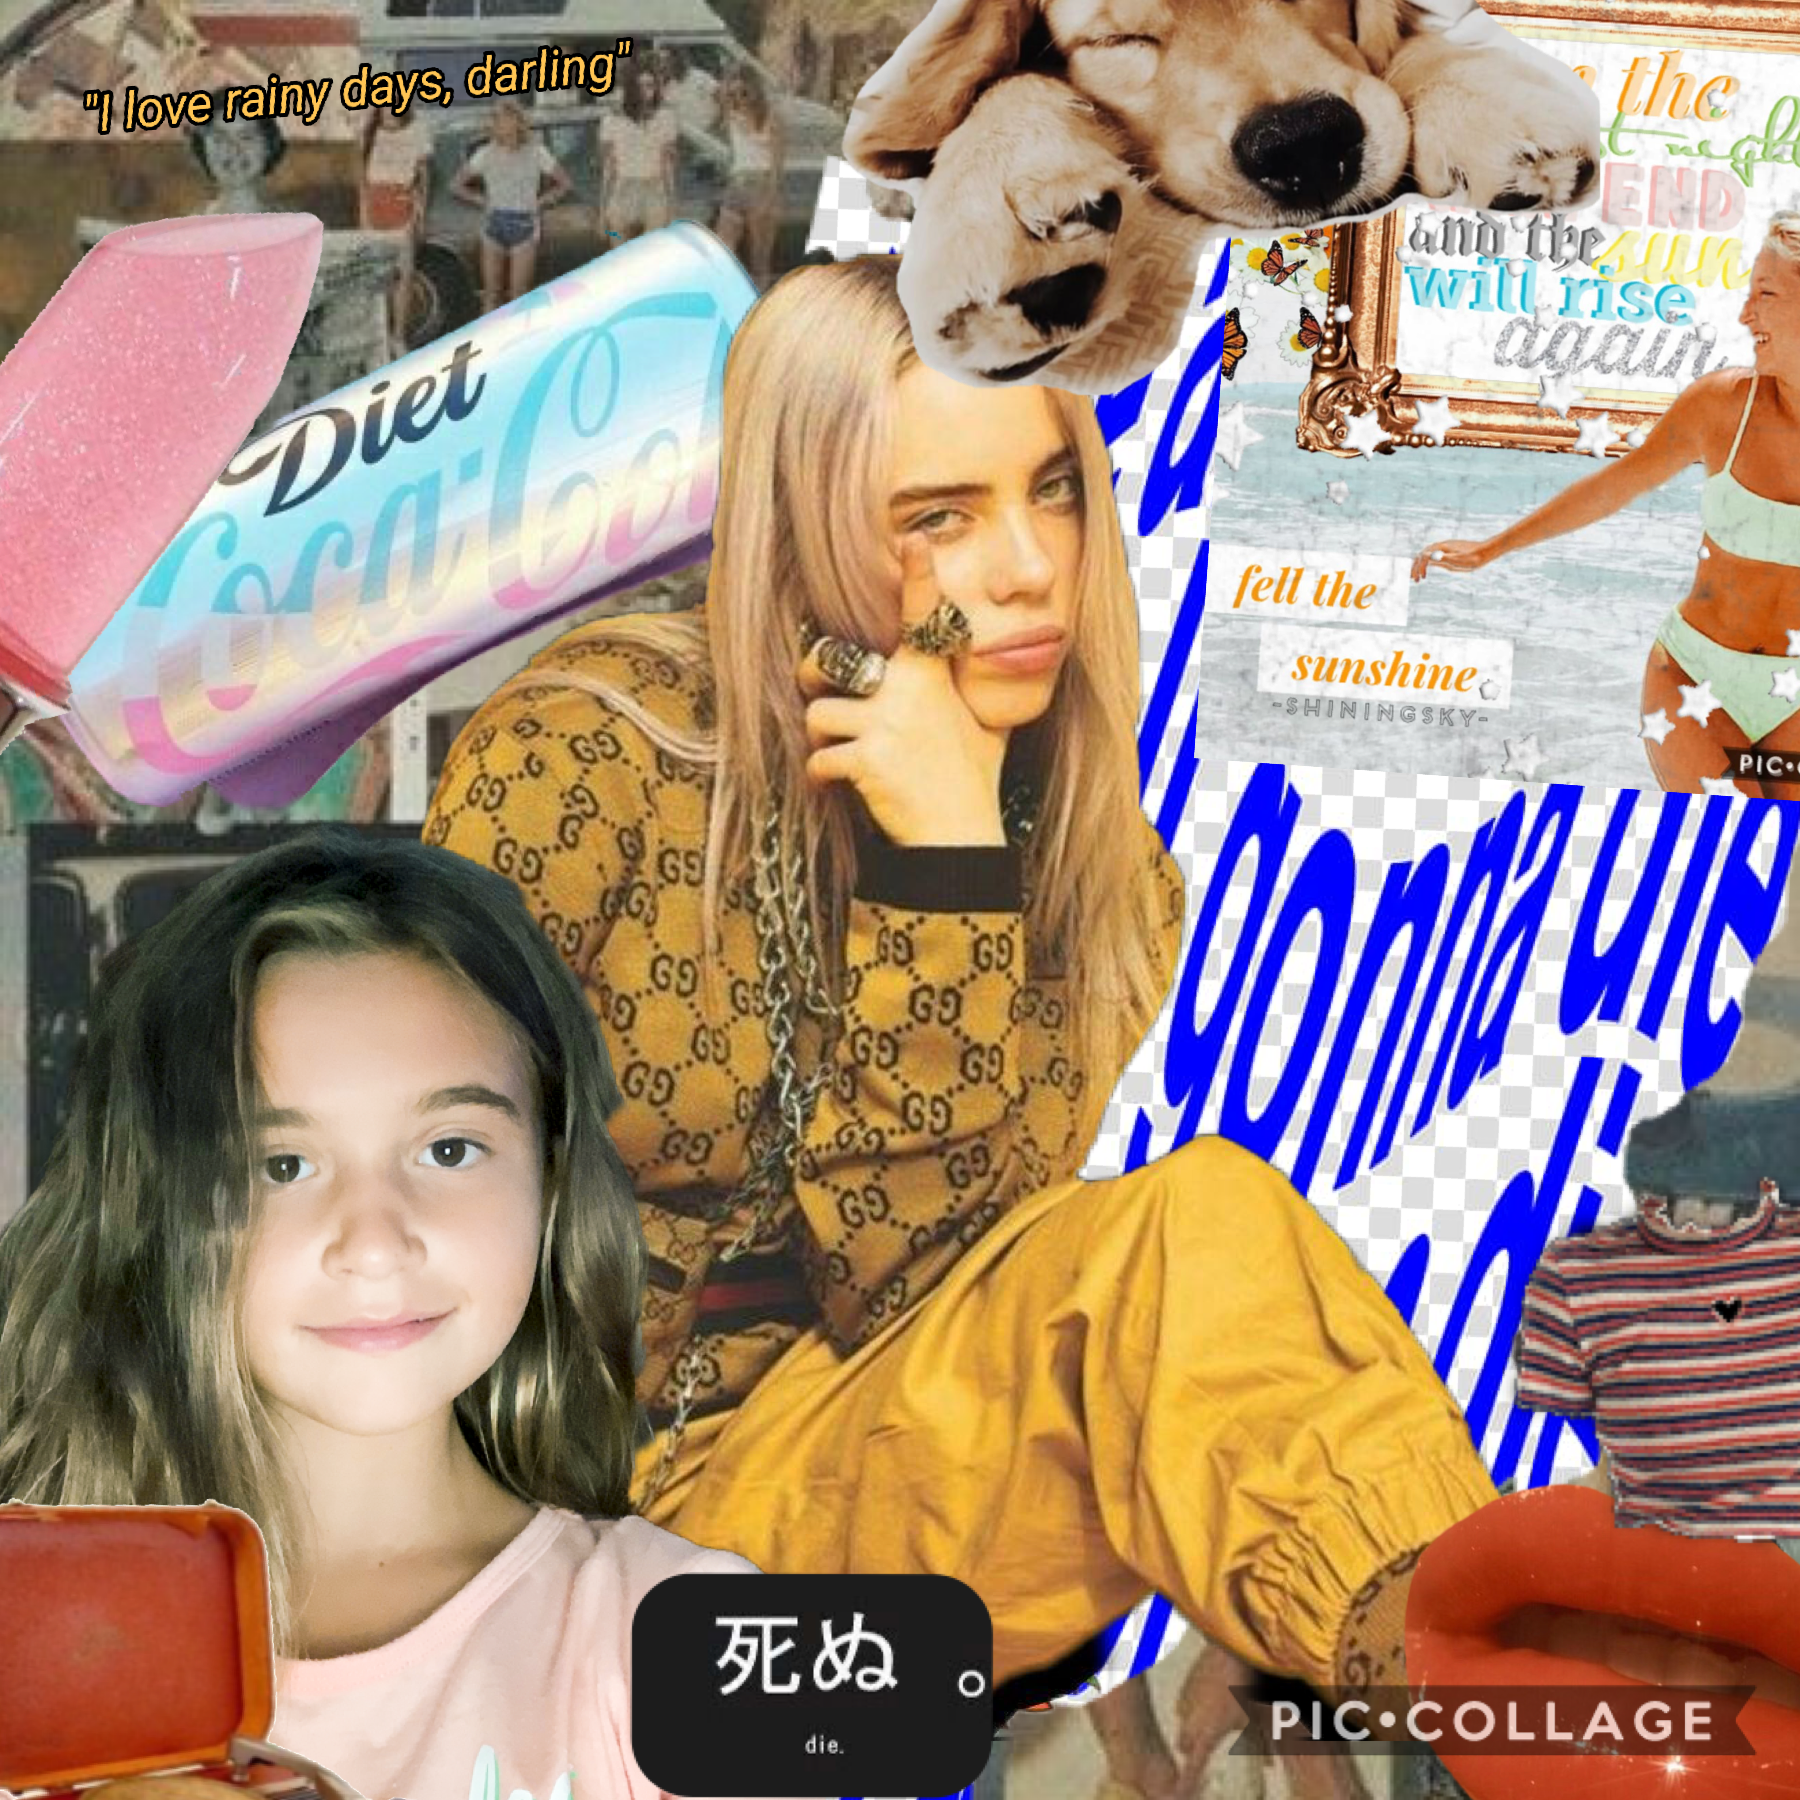 🎶🔶Tap🔶🎶
Also with my friend in it. She loves Billie Eilish. 😍😍😍